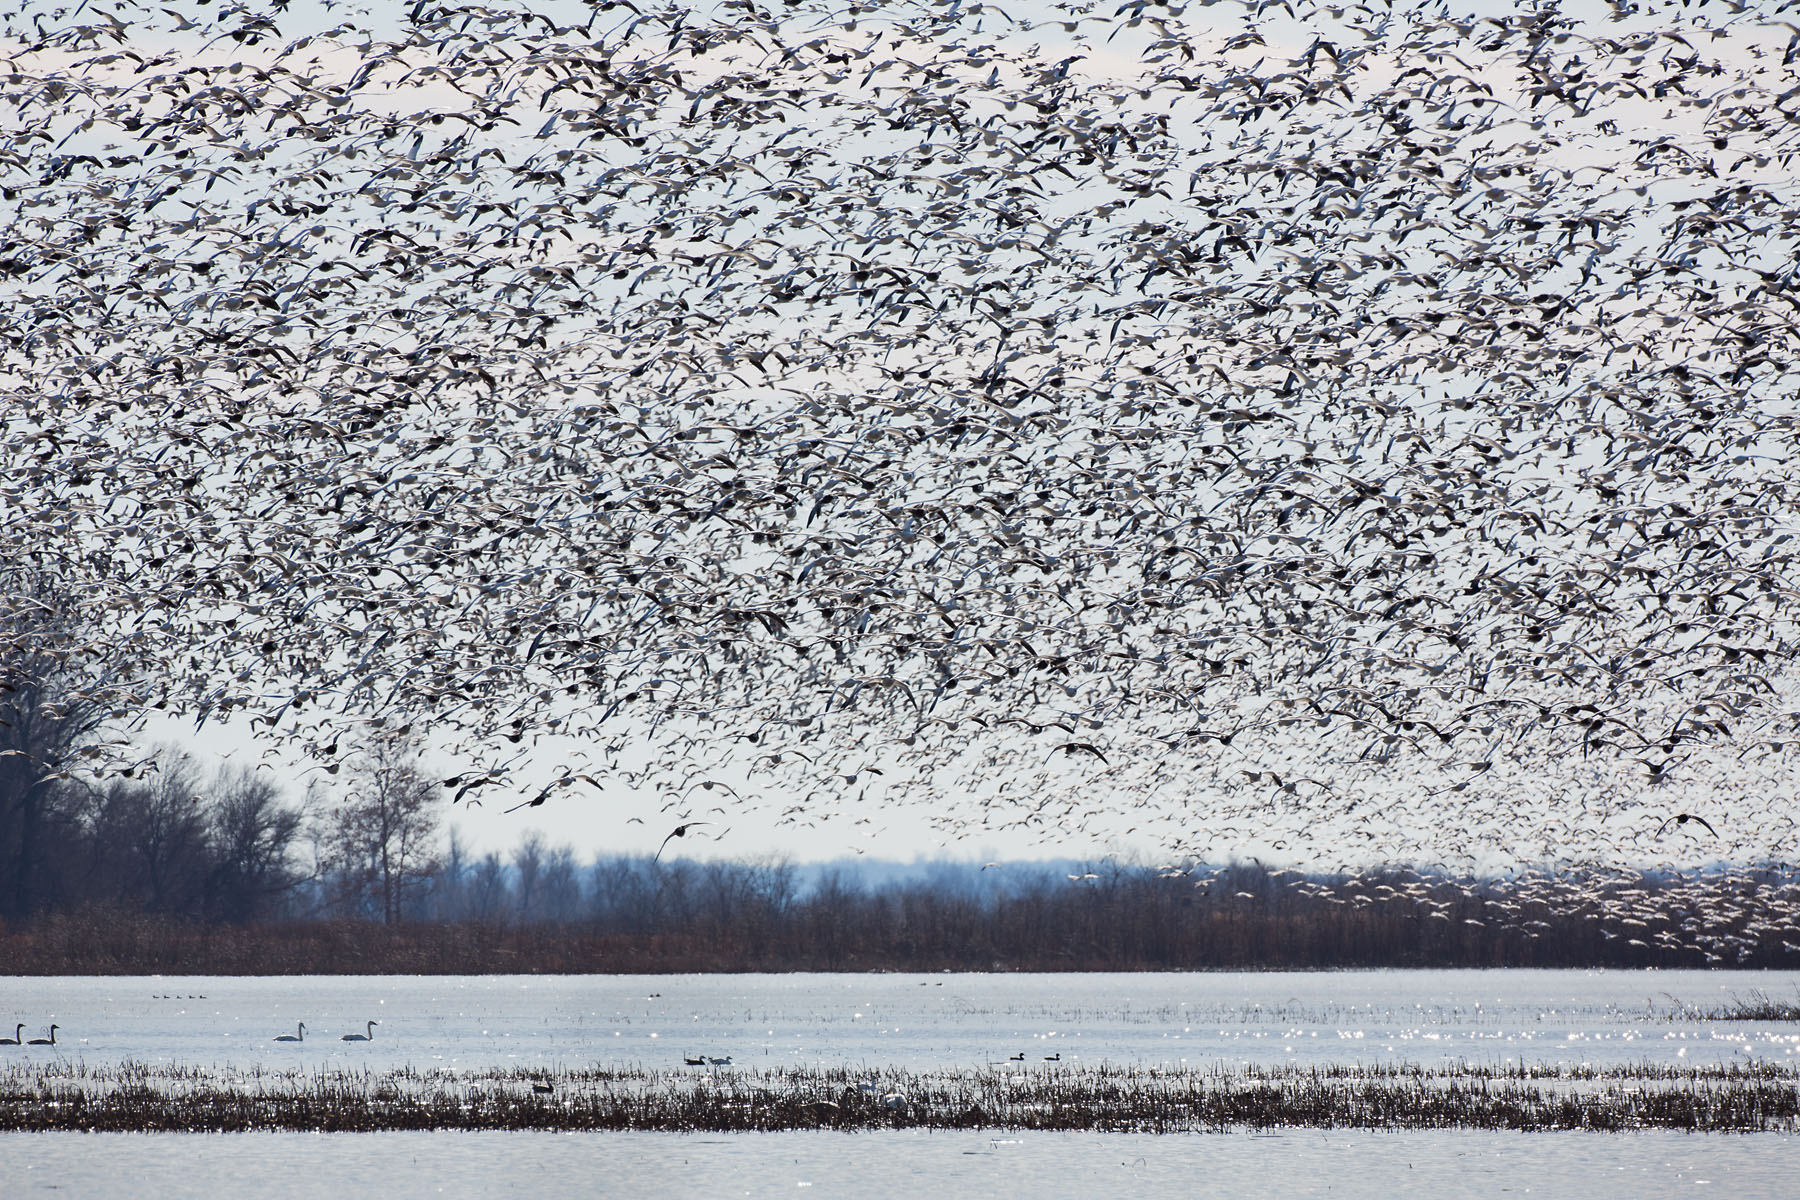 Snow geese, Loess Bluffs NWR, December 2019.  Click for next photo.